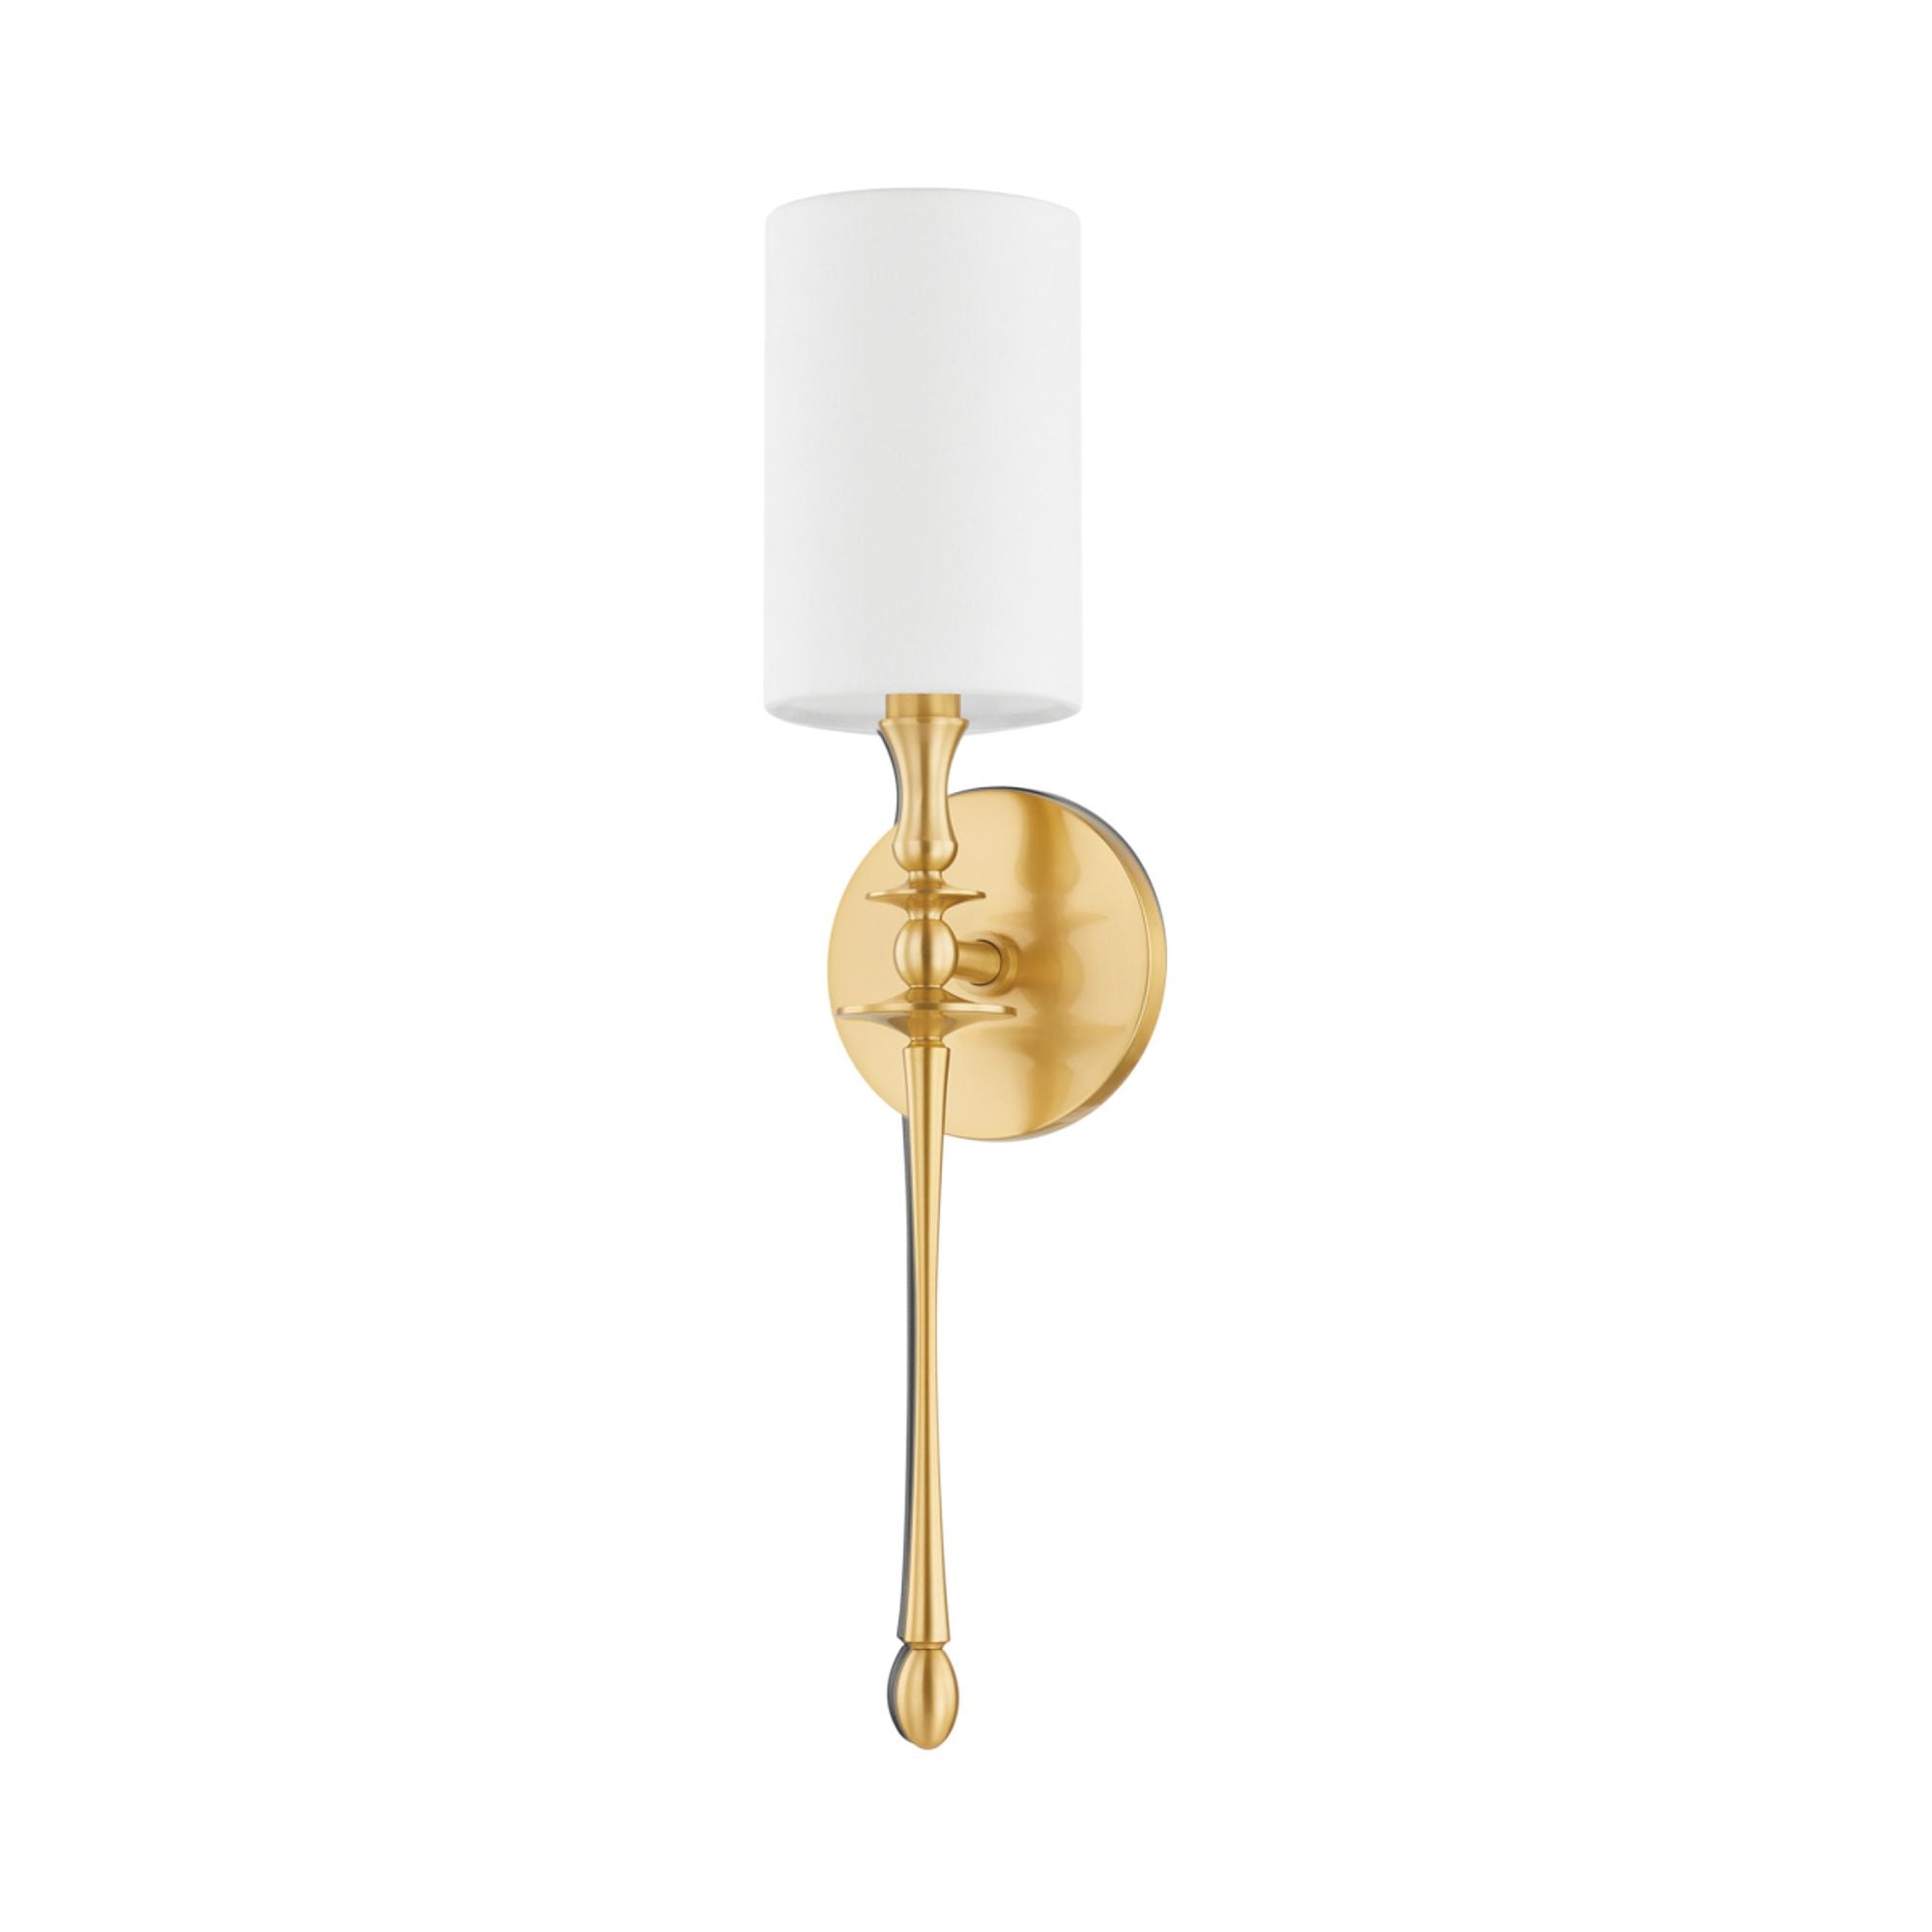 Guilford 1 Light Wall Sconce in Aged Brass